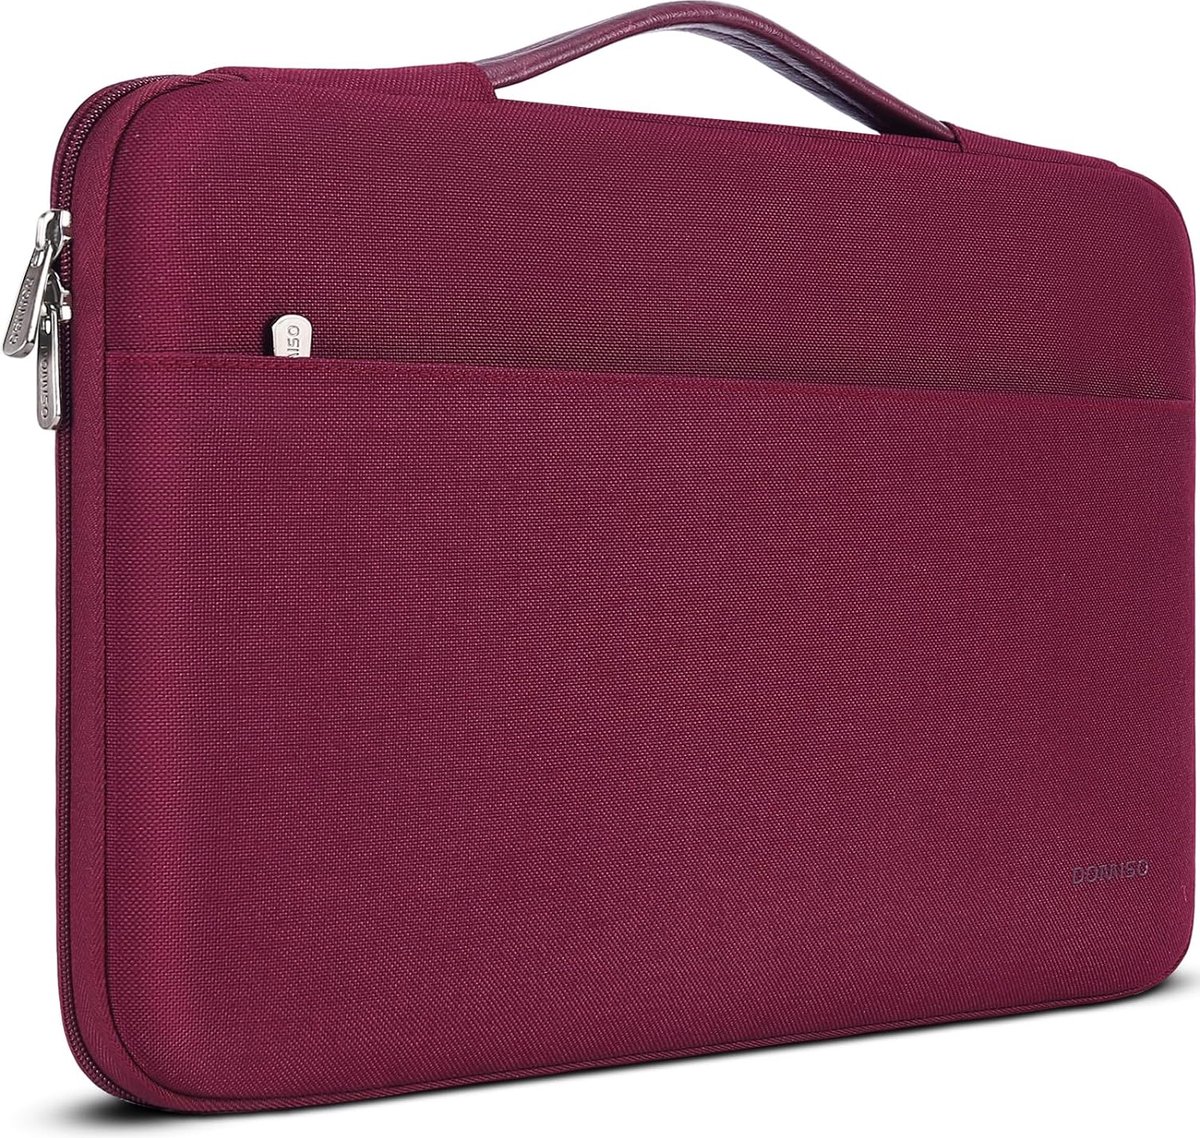 17 inch waterdichte laptophoes, laptophoes, notebookhoes, tas, beschermhoes voor 17,3